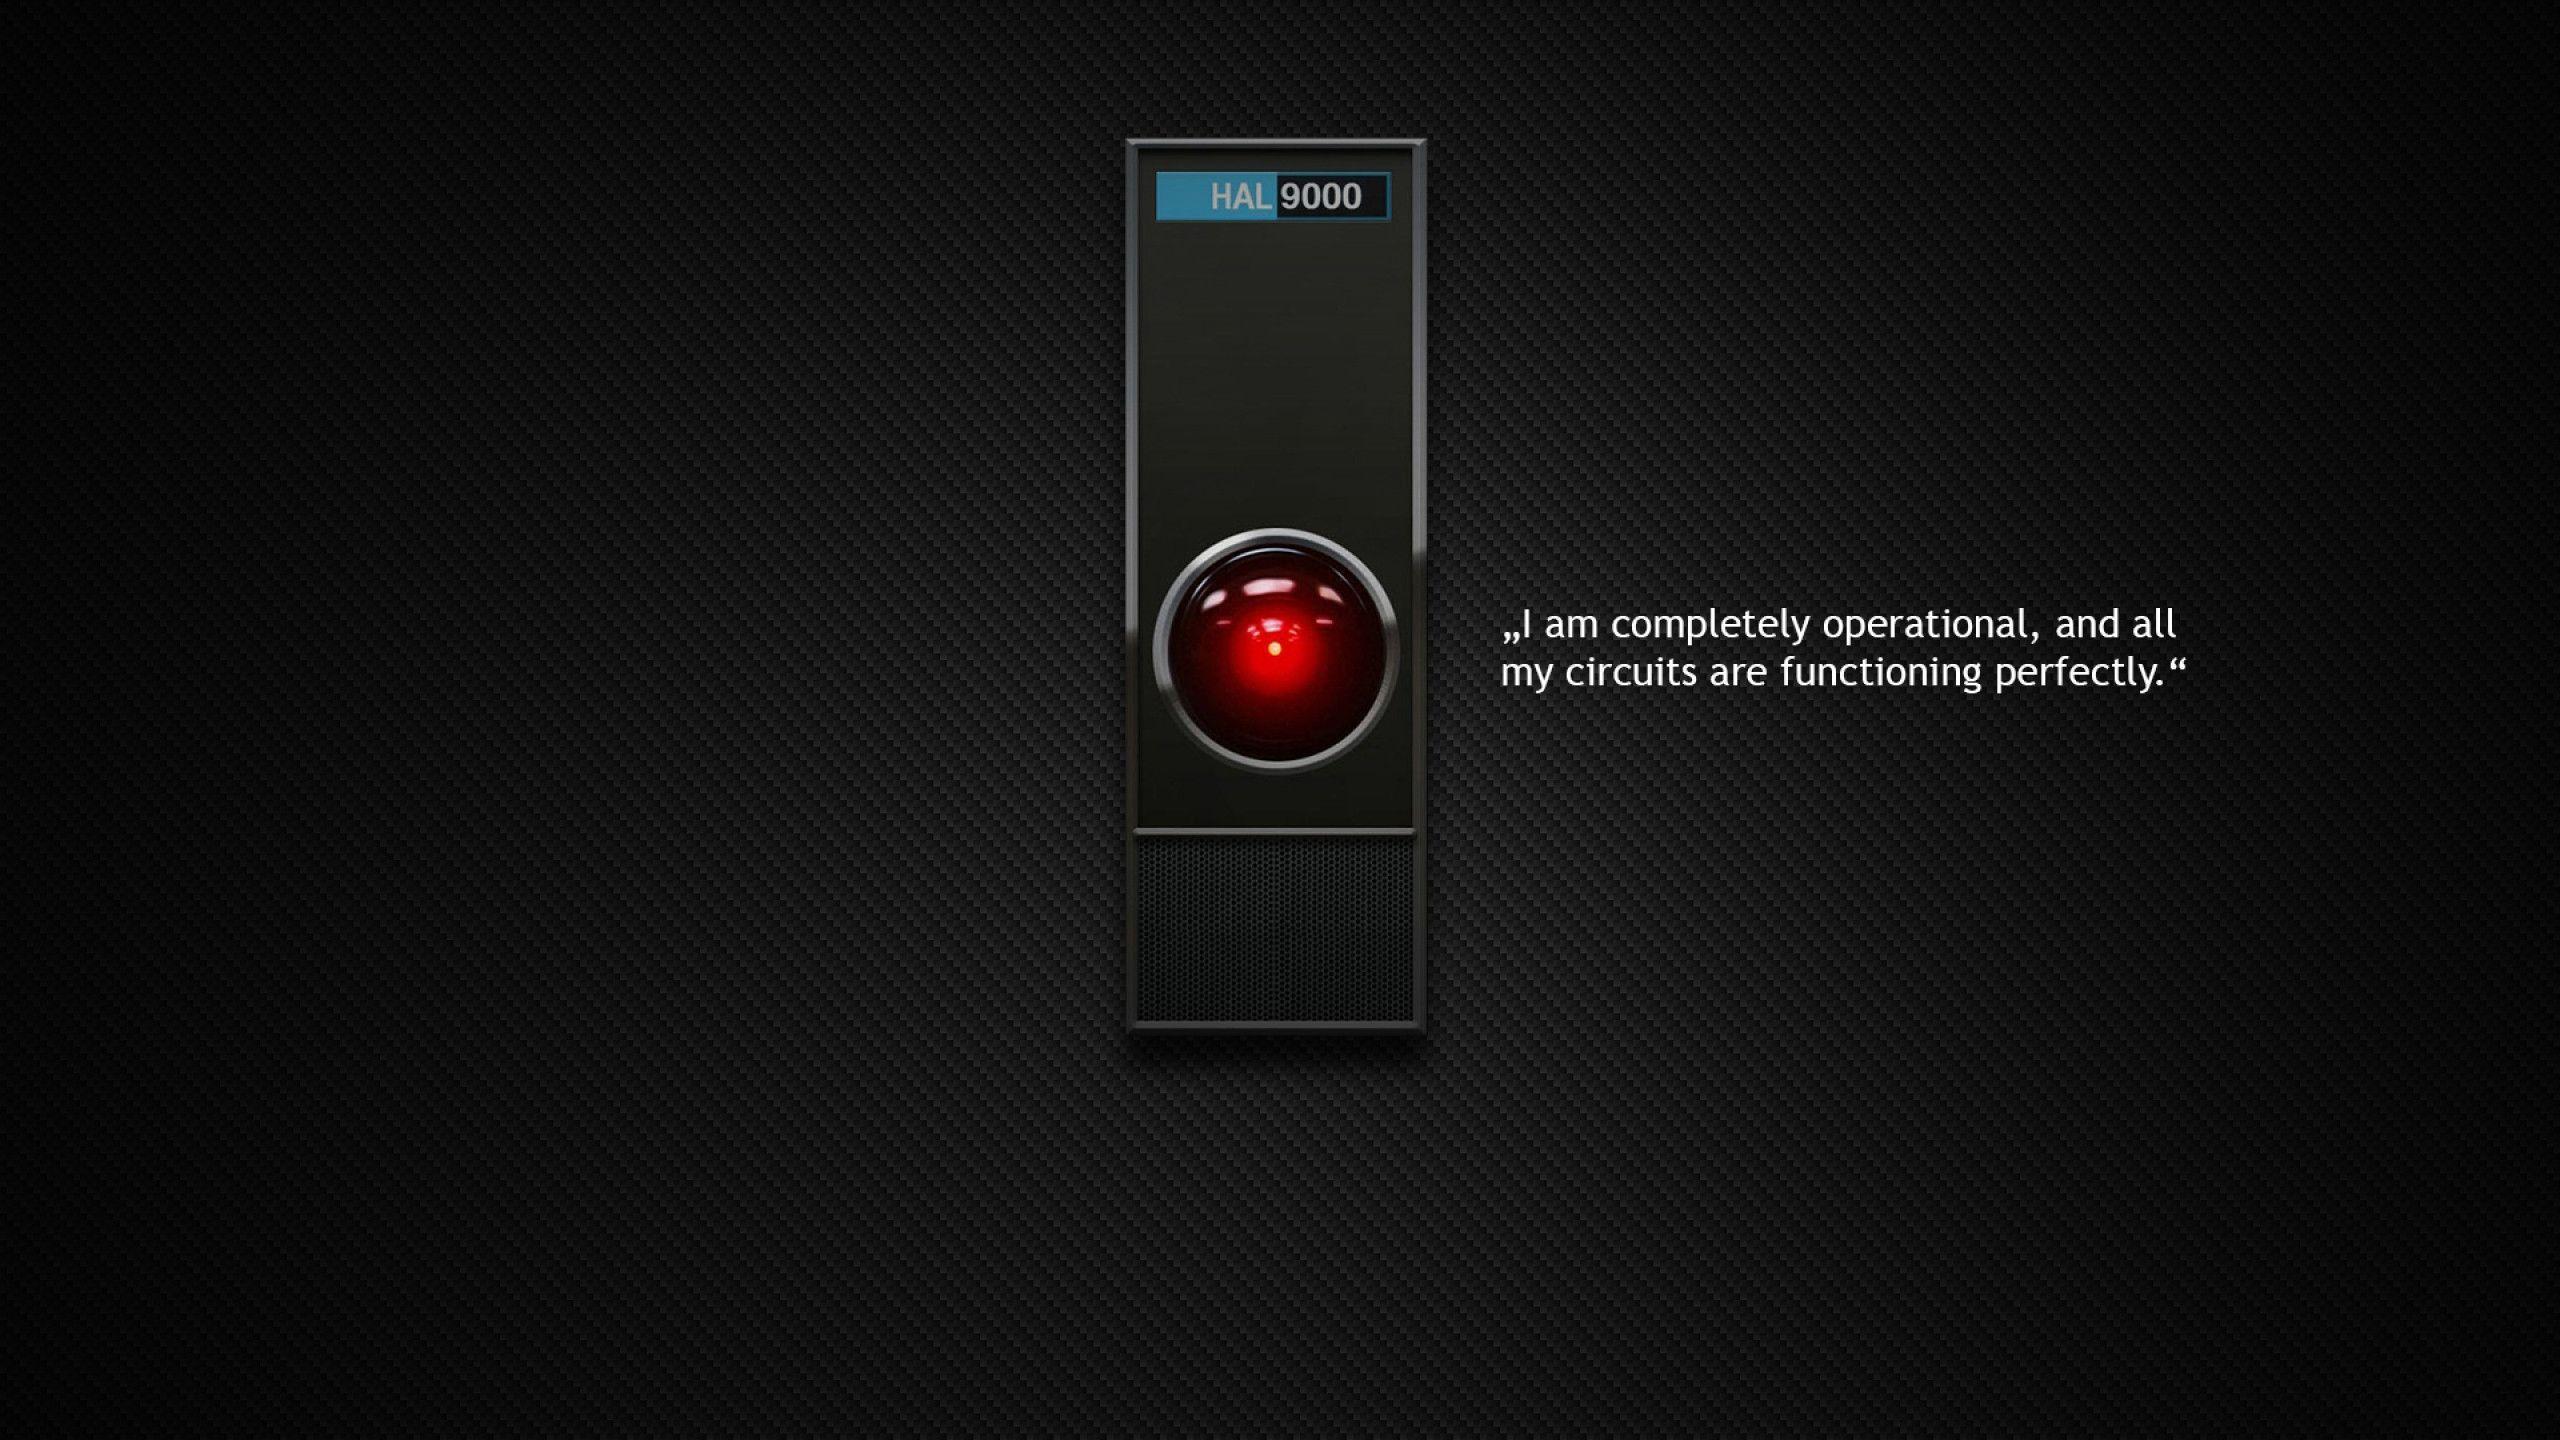 537484 1920x1080 hal 9000 xbox xbox 360 red ring of death simple black  black background humor video games 2001 a space odyssey robot wallpaper JPG  57 kB - Rare Gallery HD Wallpapers